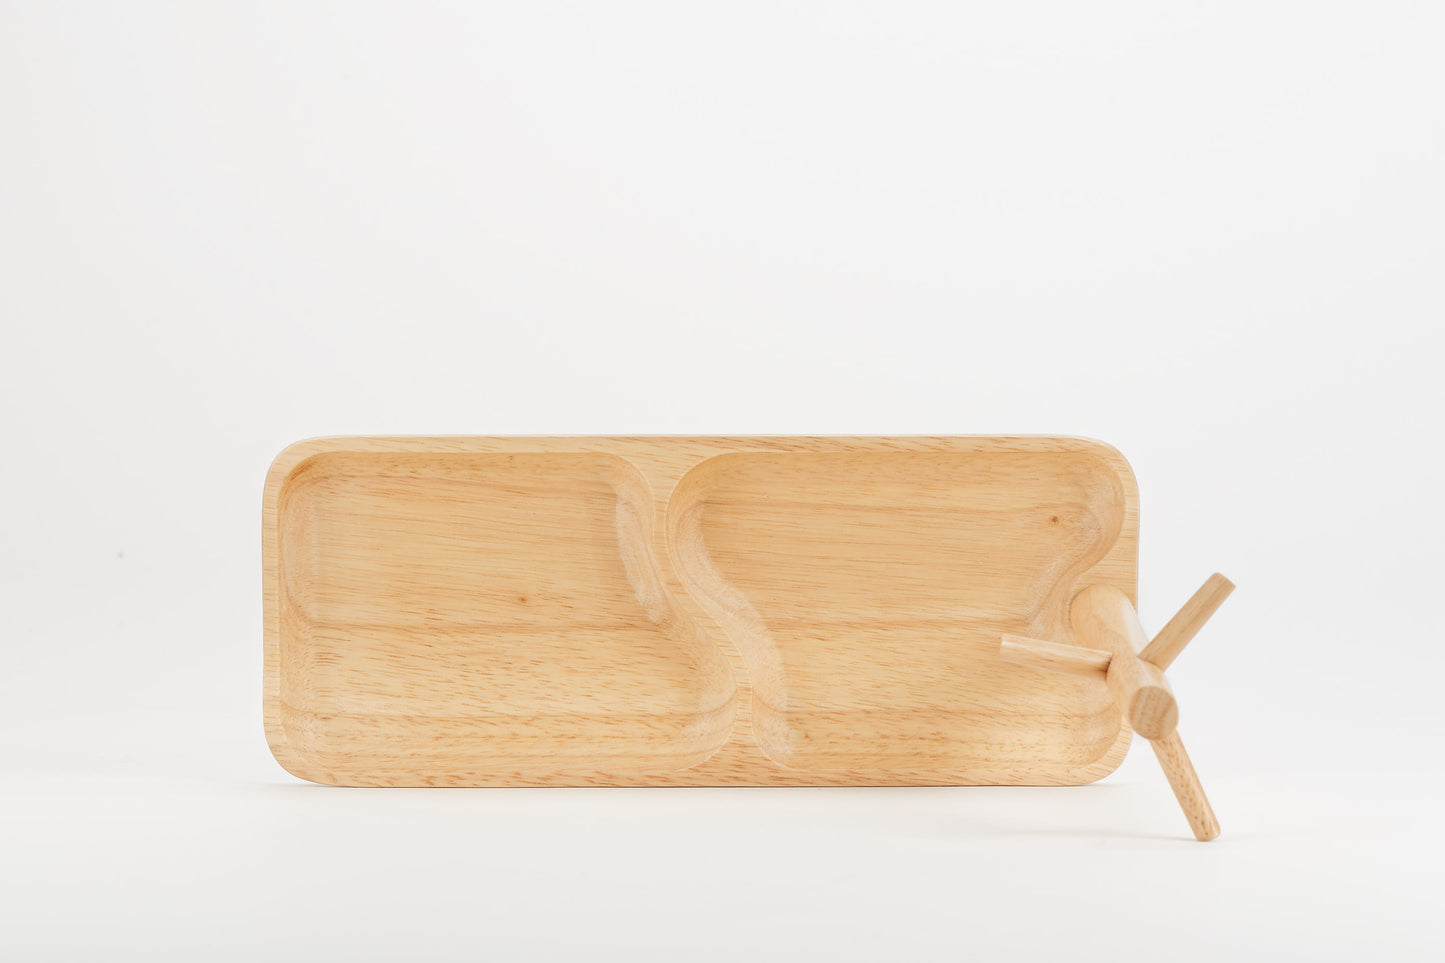 Wooden Peg Table Top Organizer - Lucid and Real